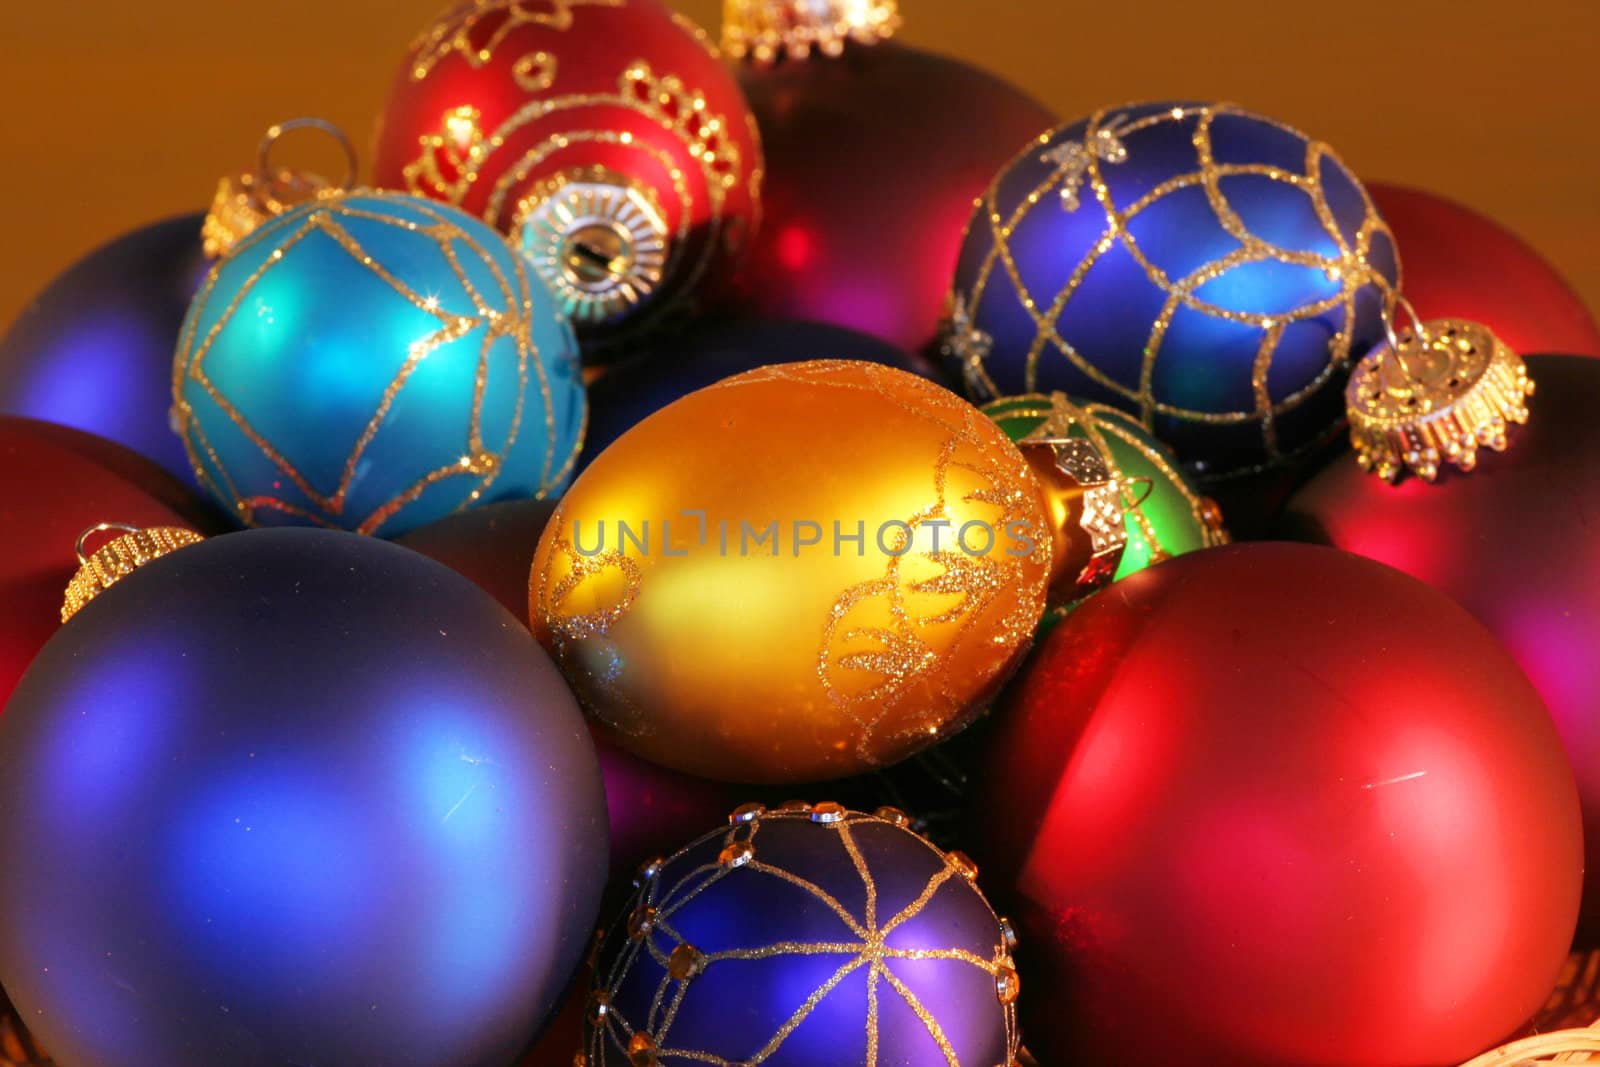 Colorful Christmas ornaments. by jarenwicklund